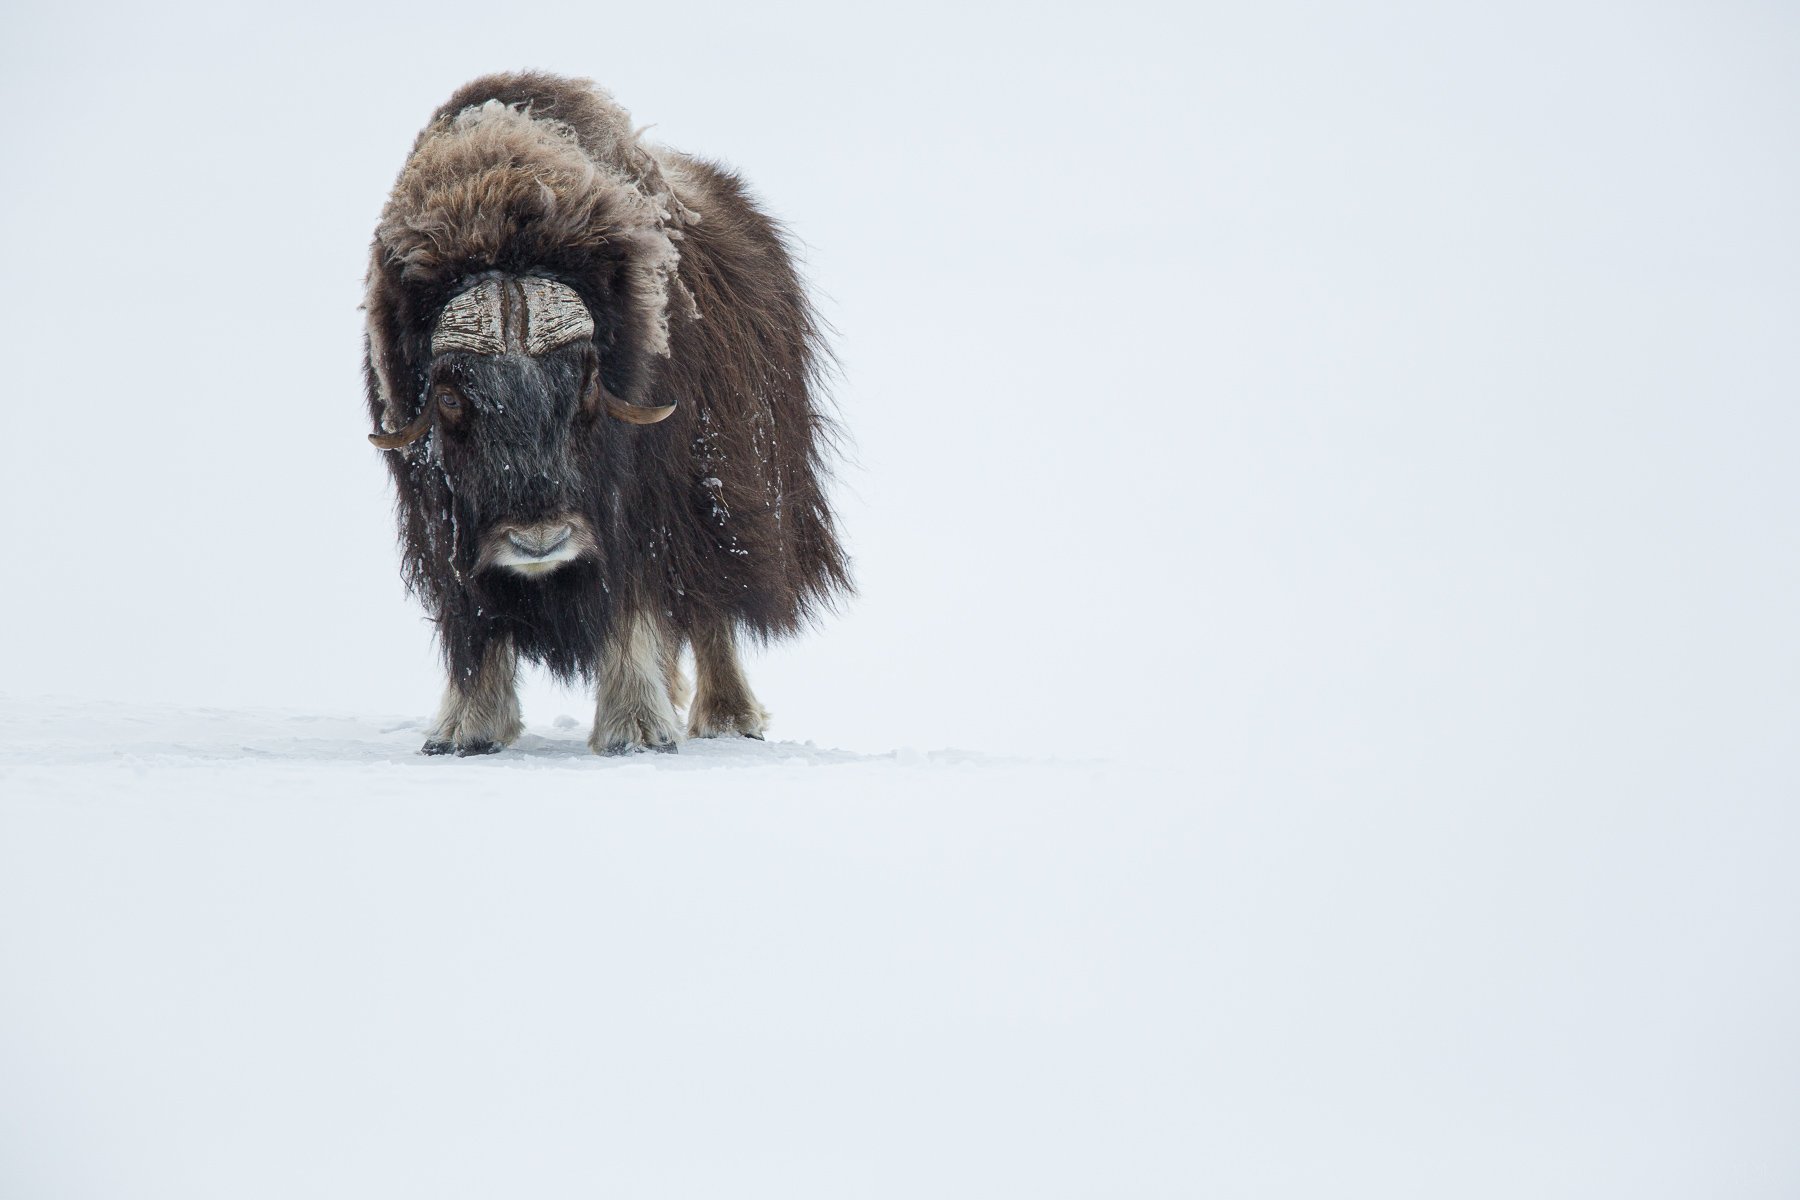  These images were taken while camping amongst a particular group of 8 bull musk oxen one winter in their northern mountain home... 